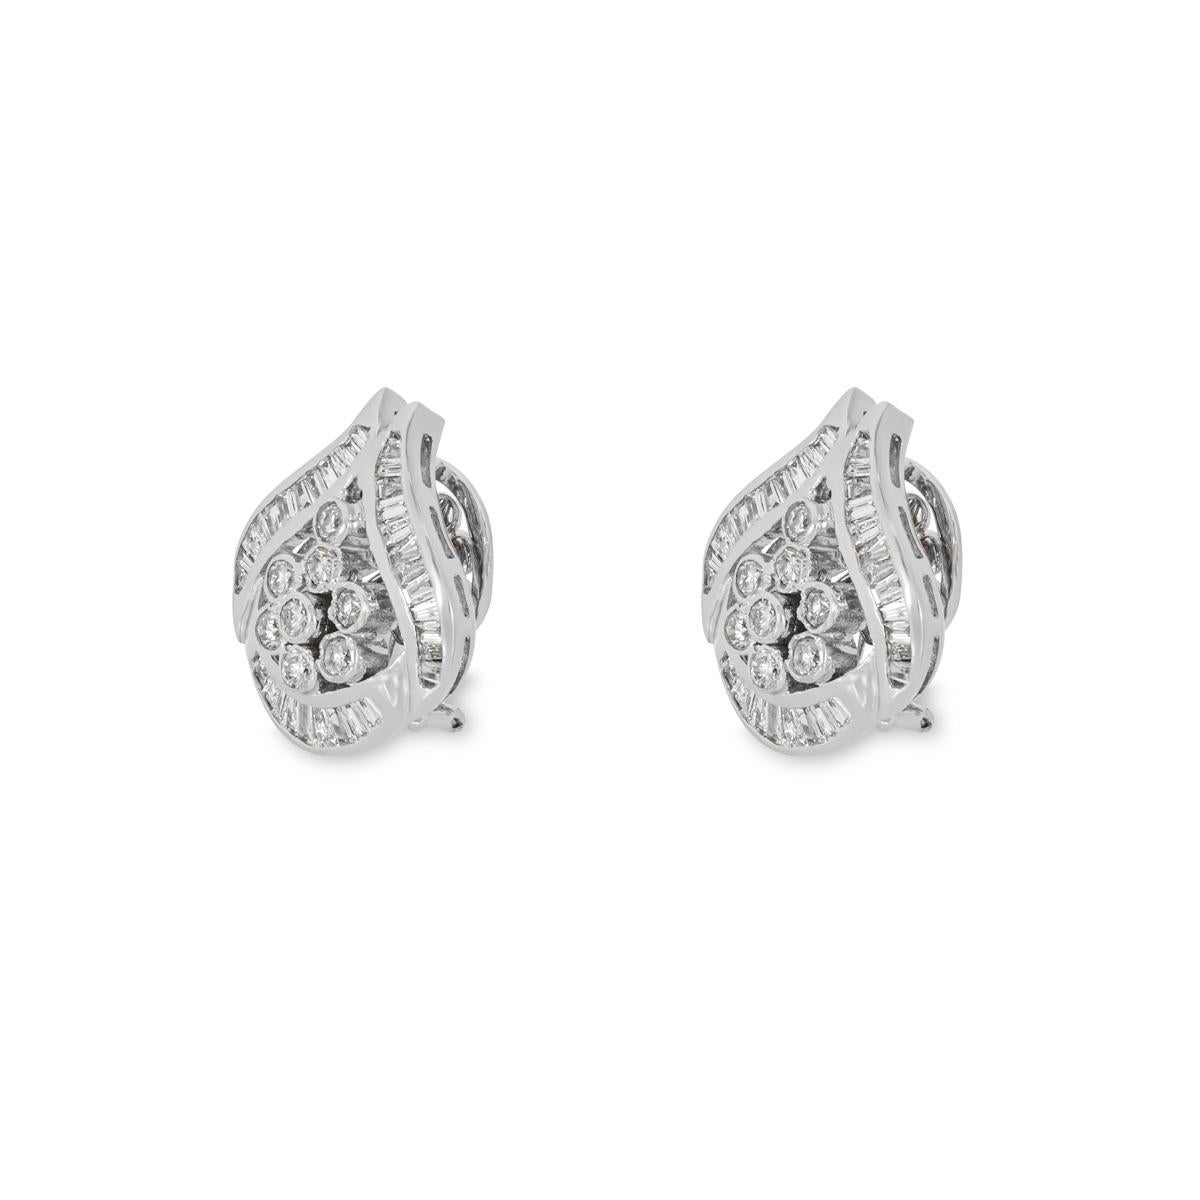 A sparkly pair of 18k white diamond earrings. The earrings each feature a floral motif set to the centre consisting of 8 round brilliant cut diamonds with an approximate total weight of 0.64ct G-H colour and SI clarity. Set around the border in a